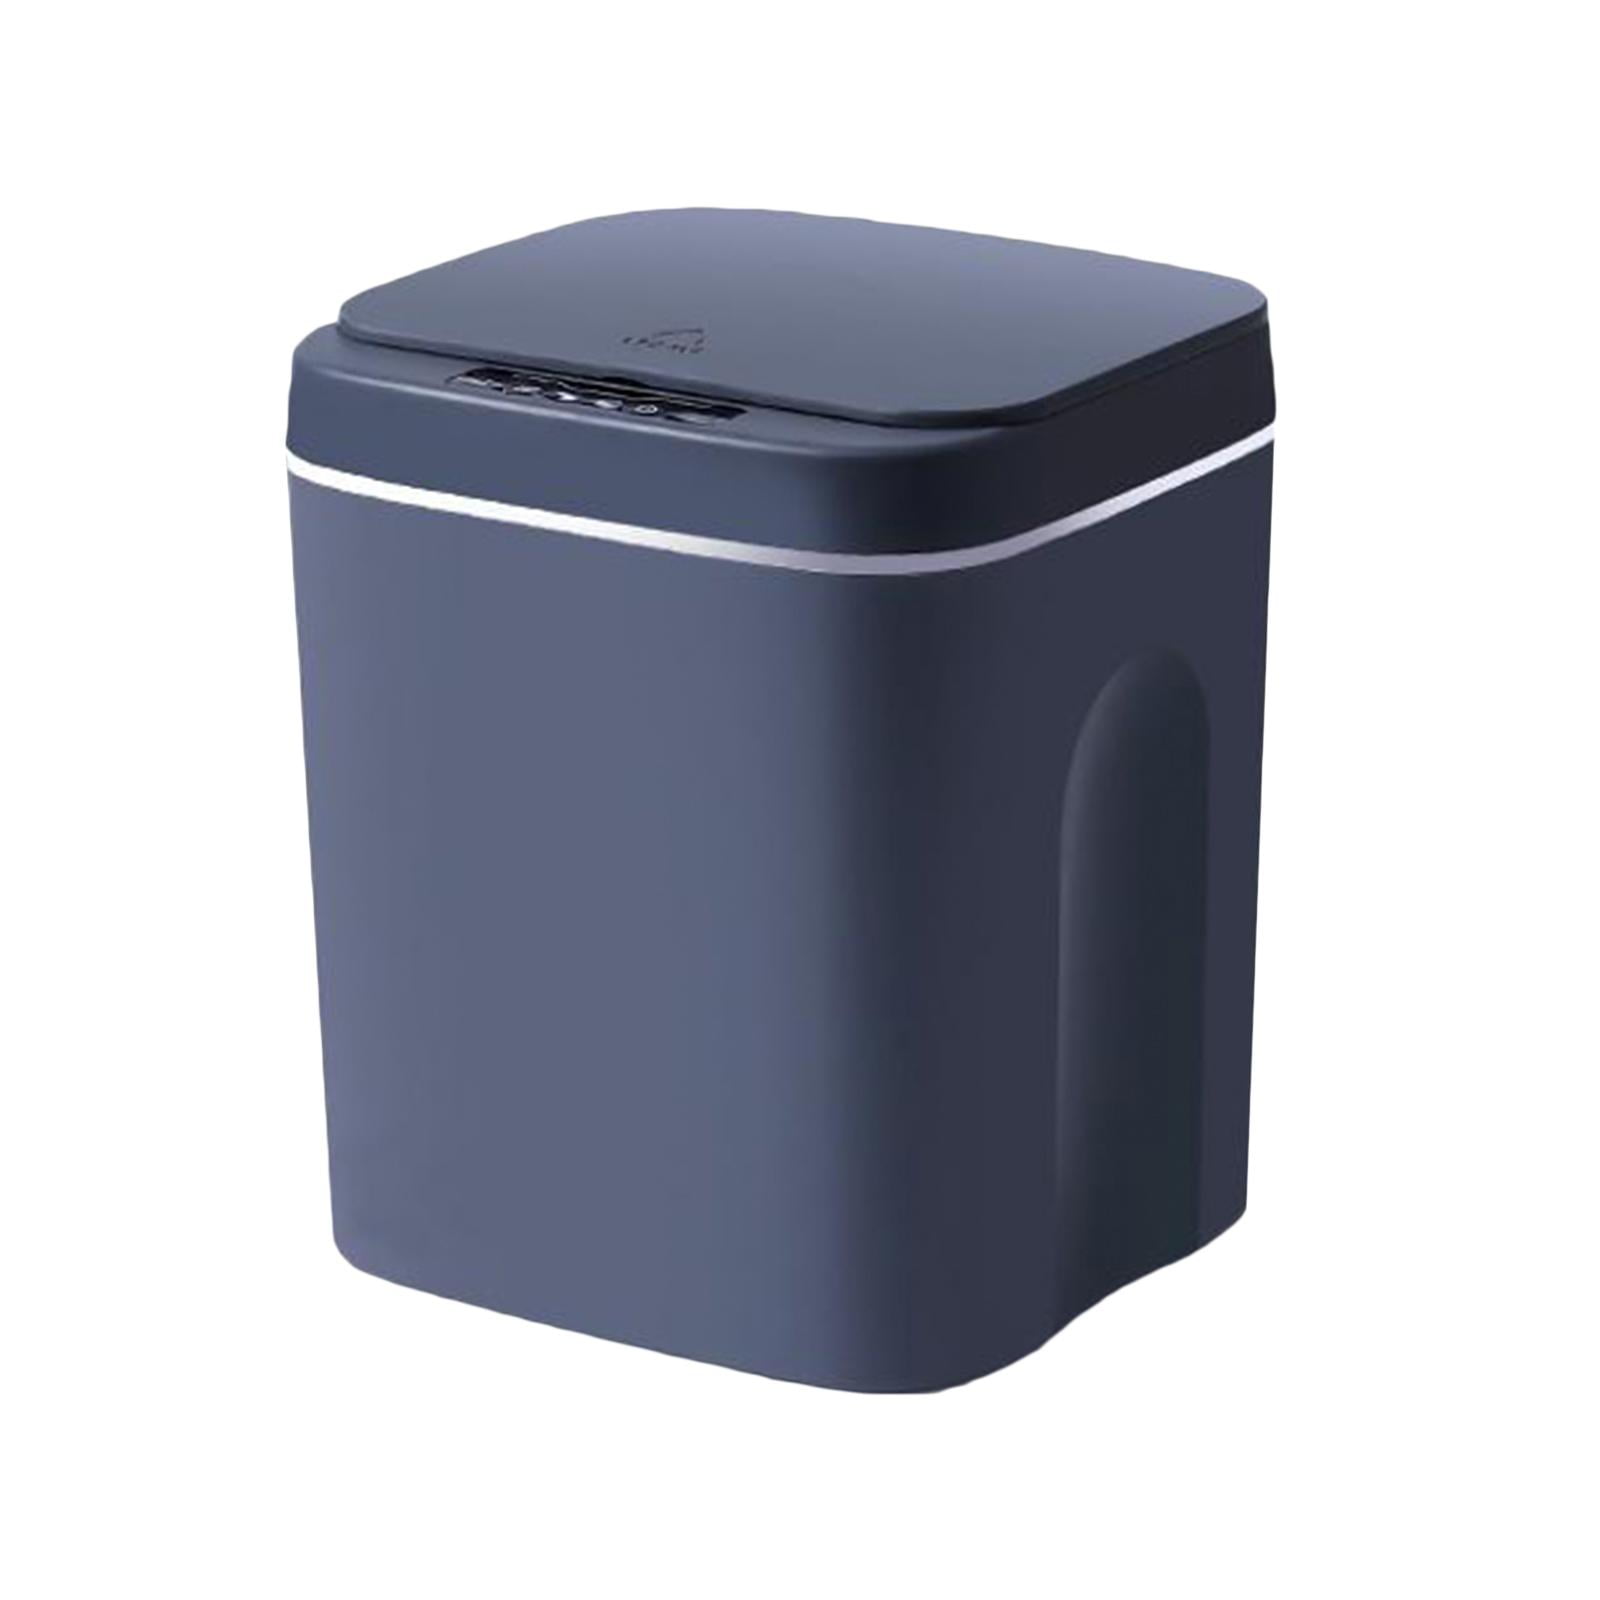 Rectangular Bathroom Touchless Sensor Trash Can Garbage Can with Lid